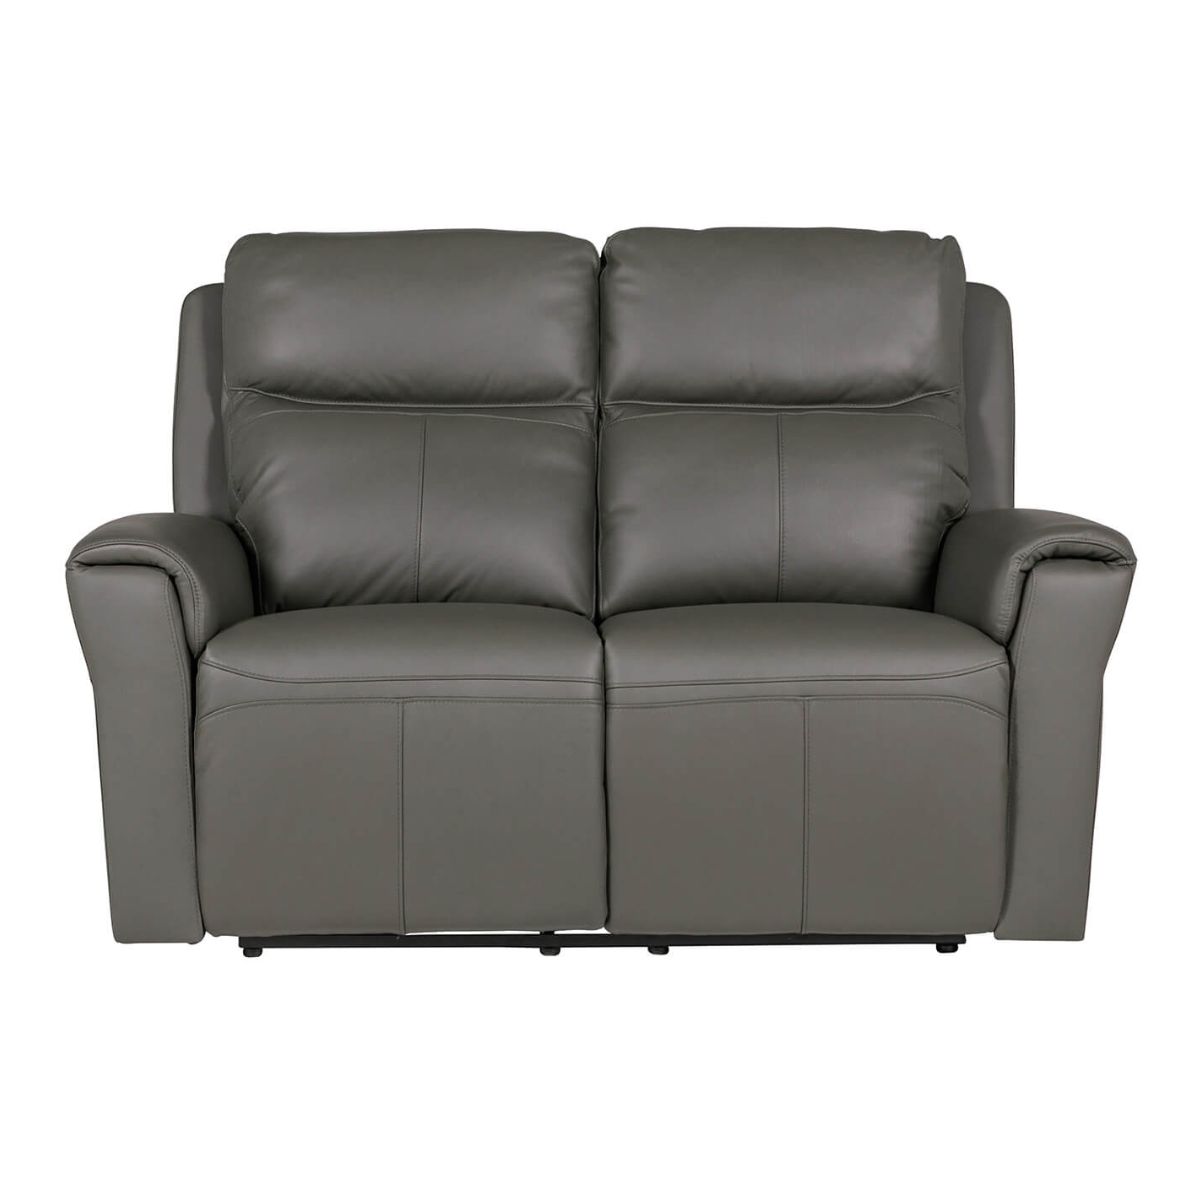 Rosslare Leather 2 Seater Electric Recliner Grey - 1